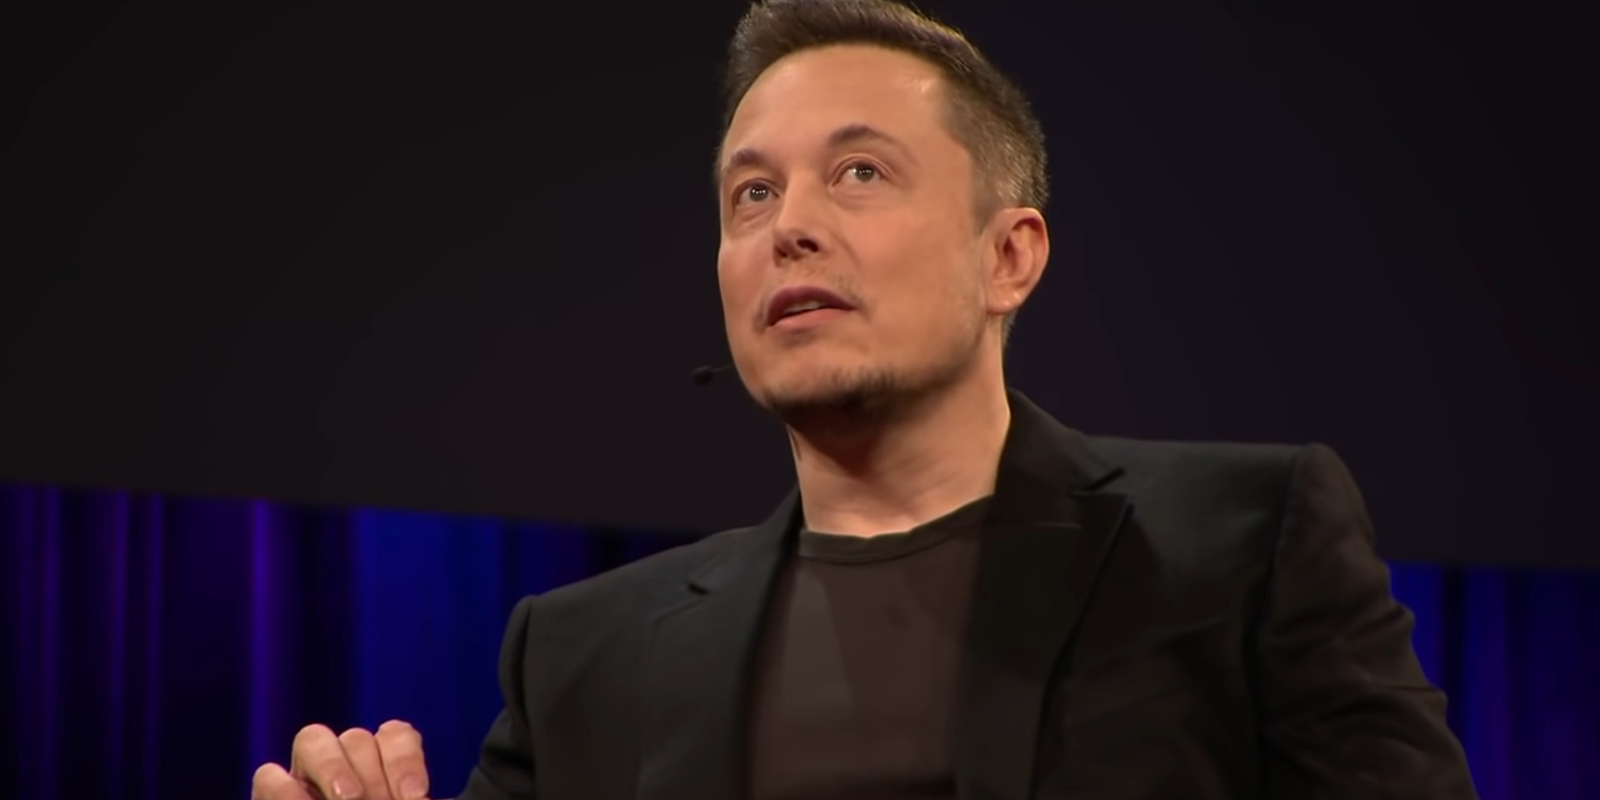 A picture of Elon Musk from a TED talk